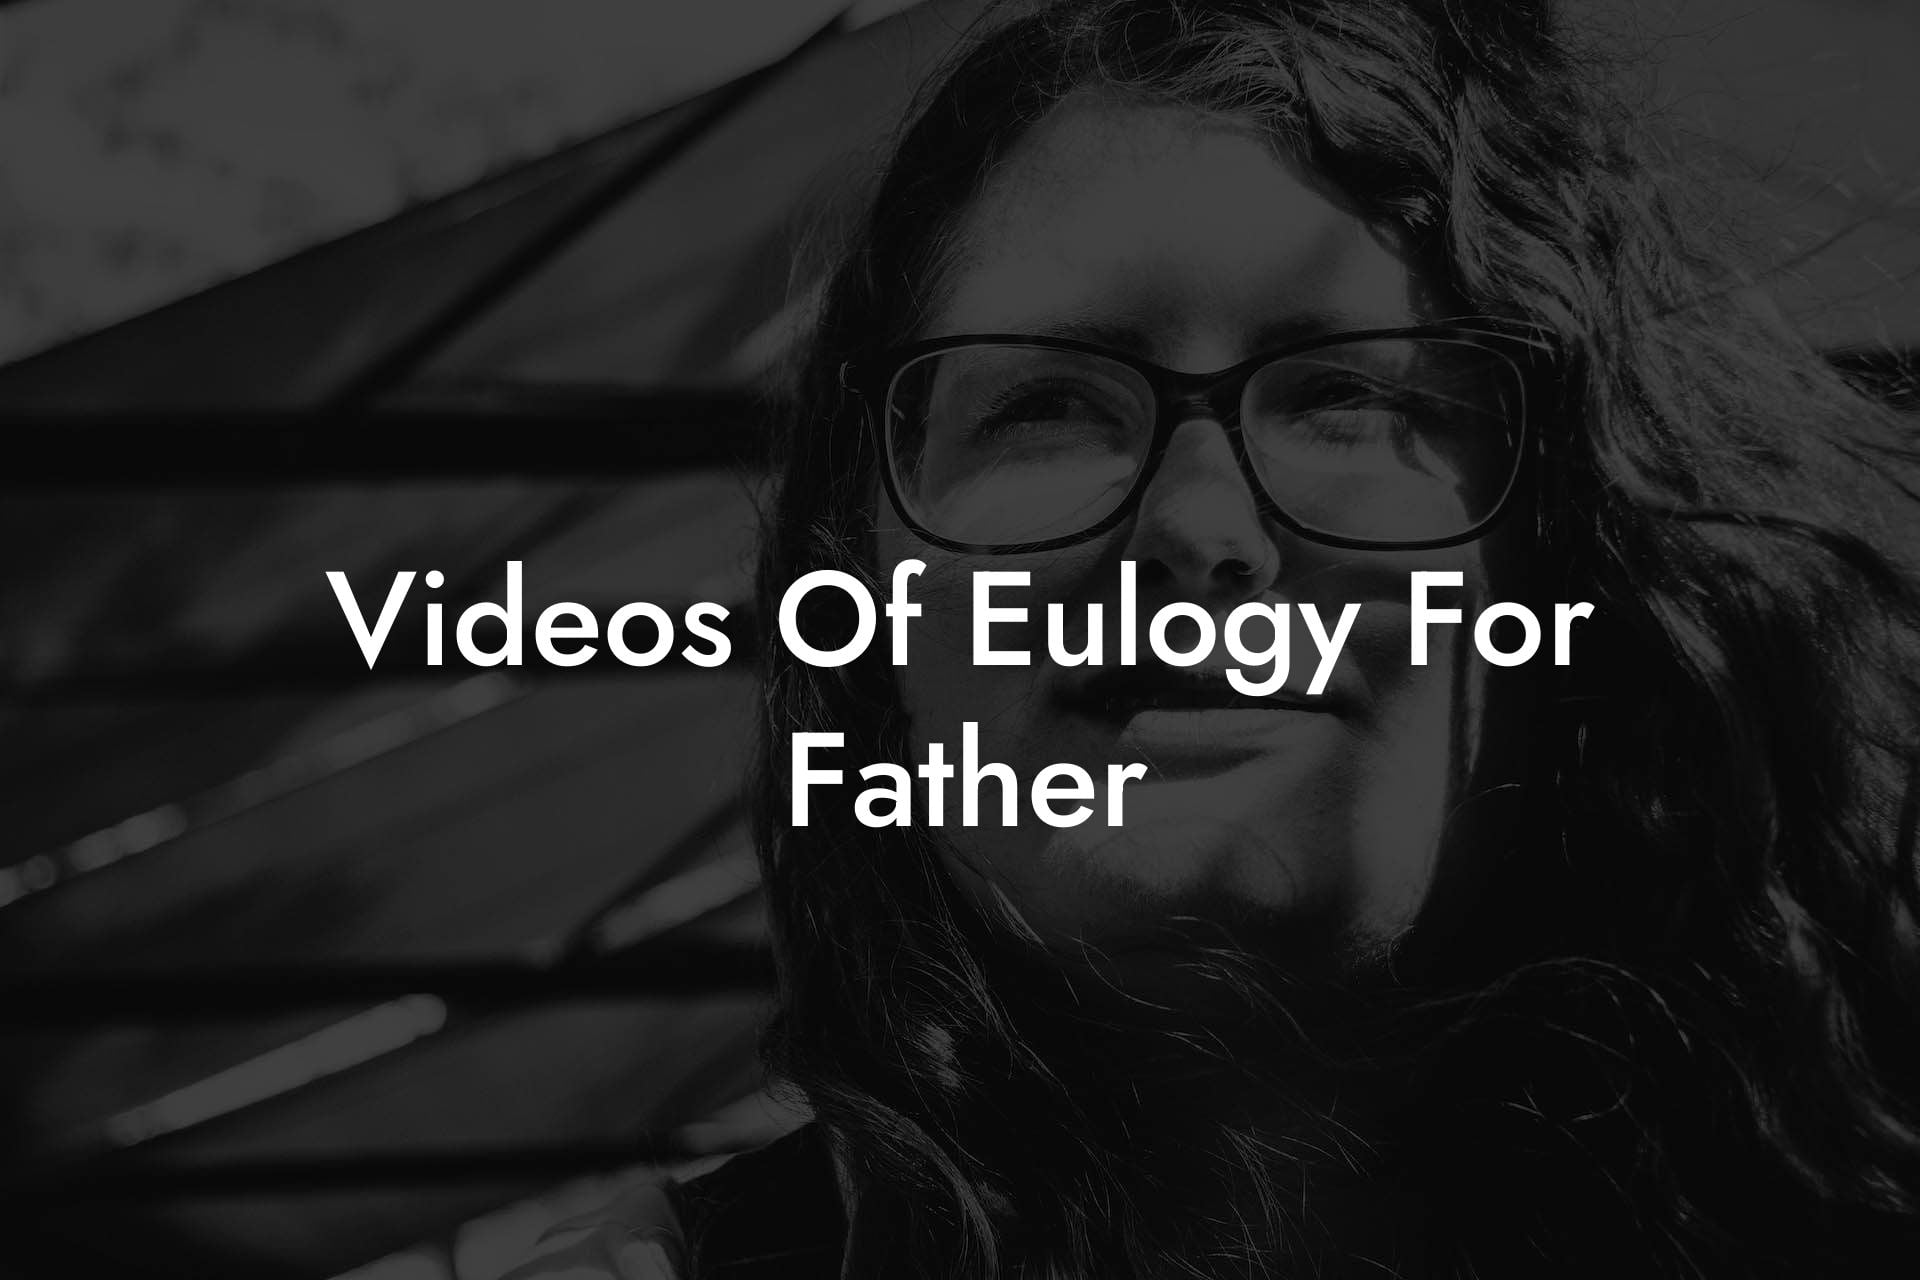 Videos Of Eulogy For Father